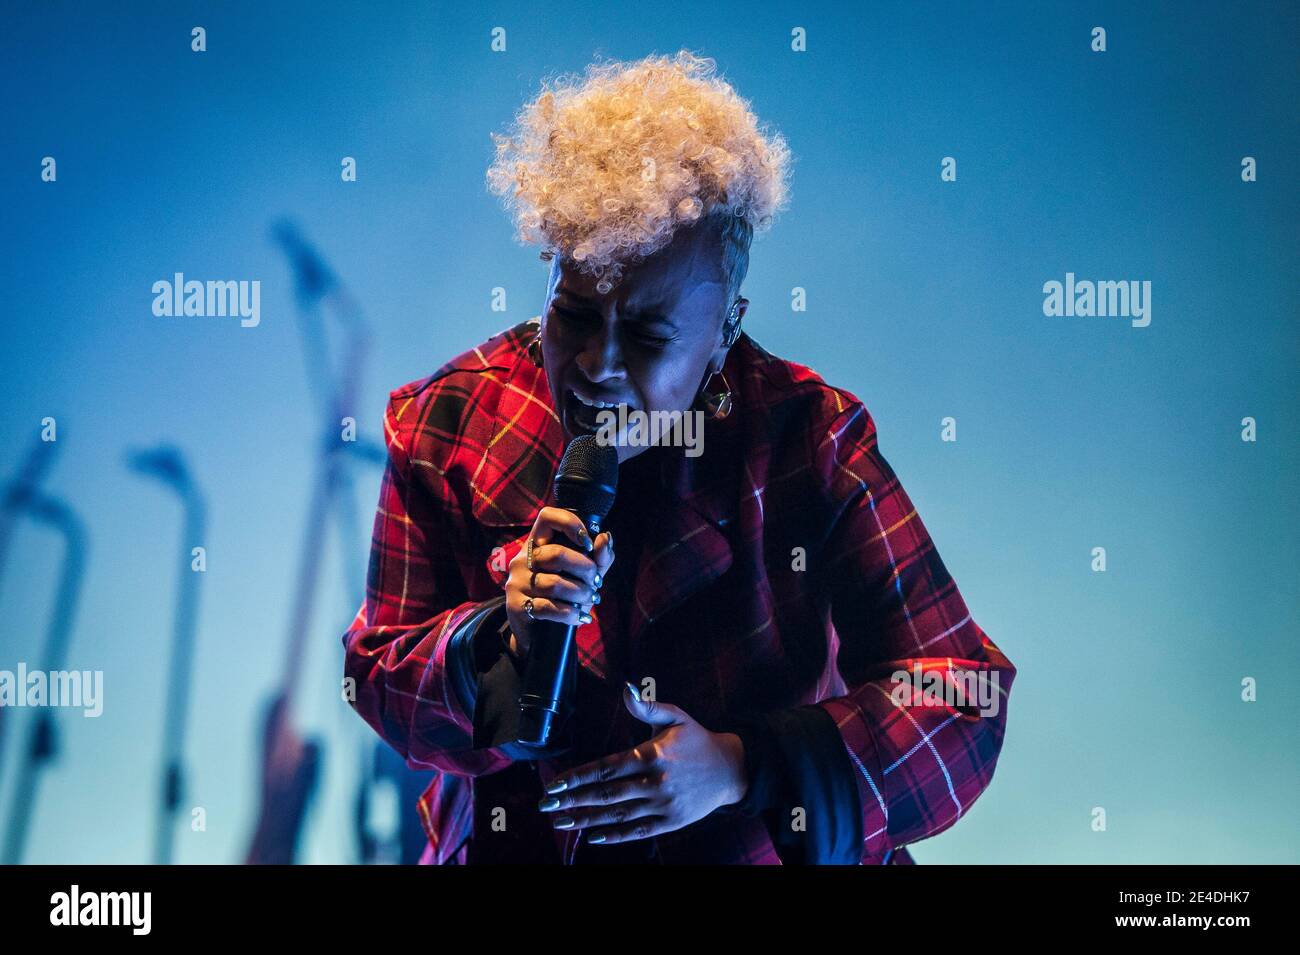 Emeli Sandé performs live on stage at the O2 Brixton Academy, London.  Picture date: Stock Photo